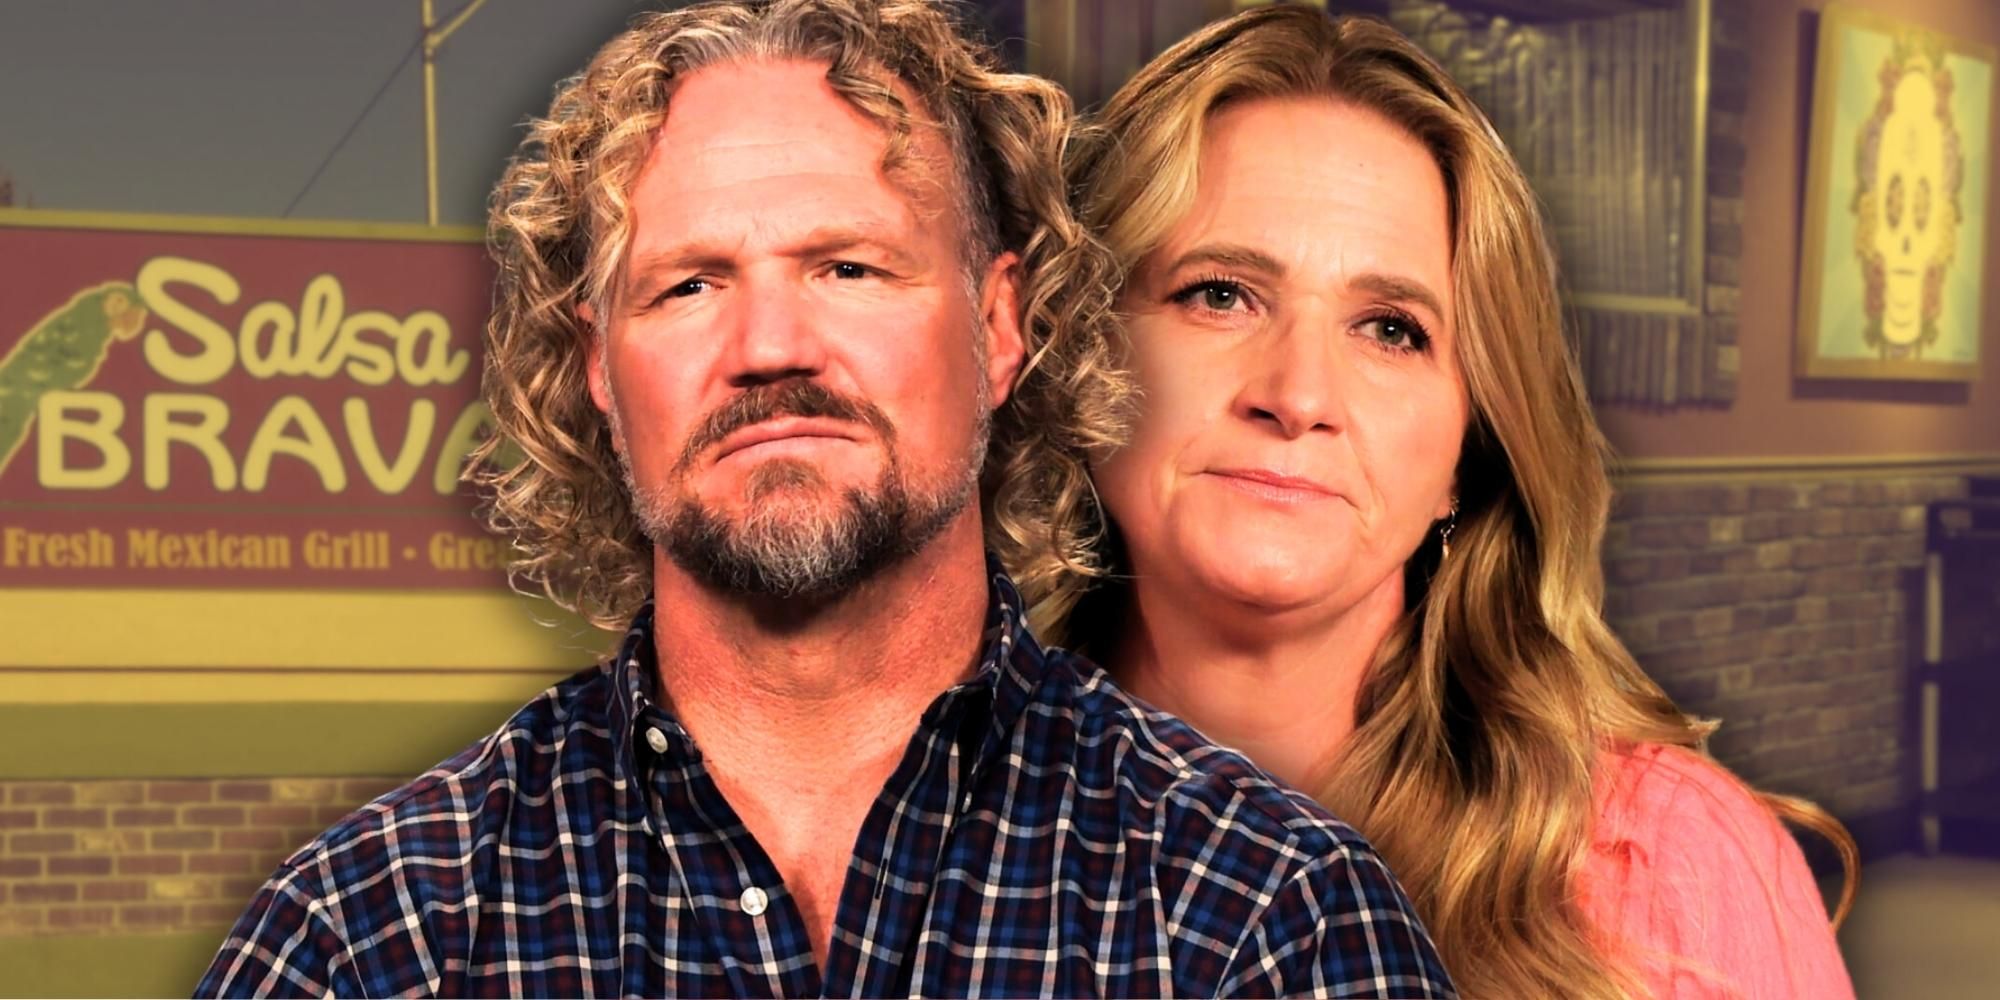 Sister Wives: What Is Salsa Brava? (Kody & Christine Have Fought There)